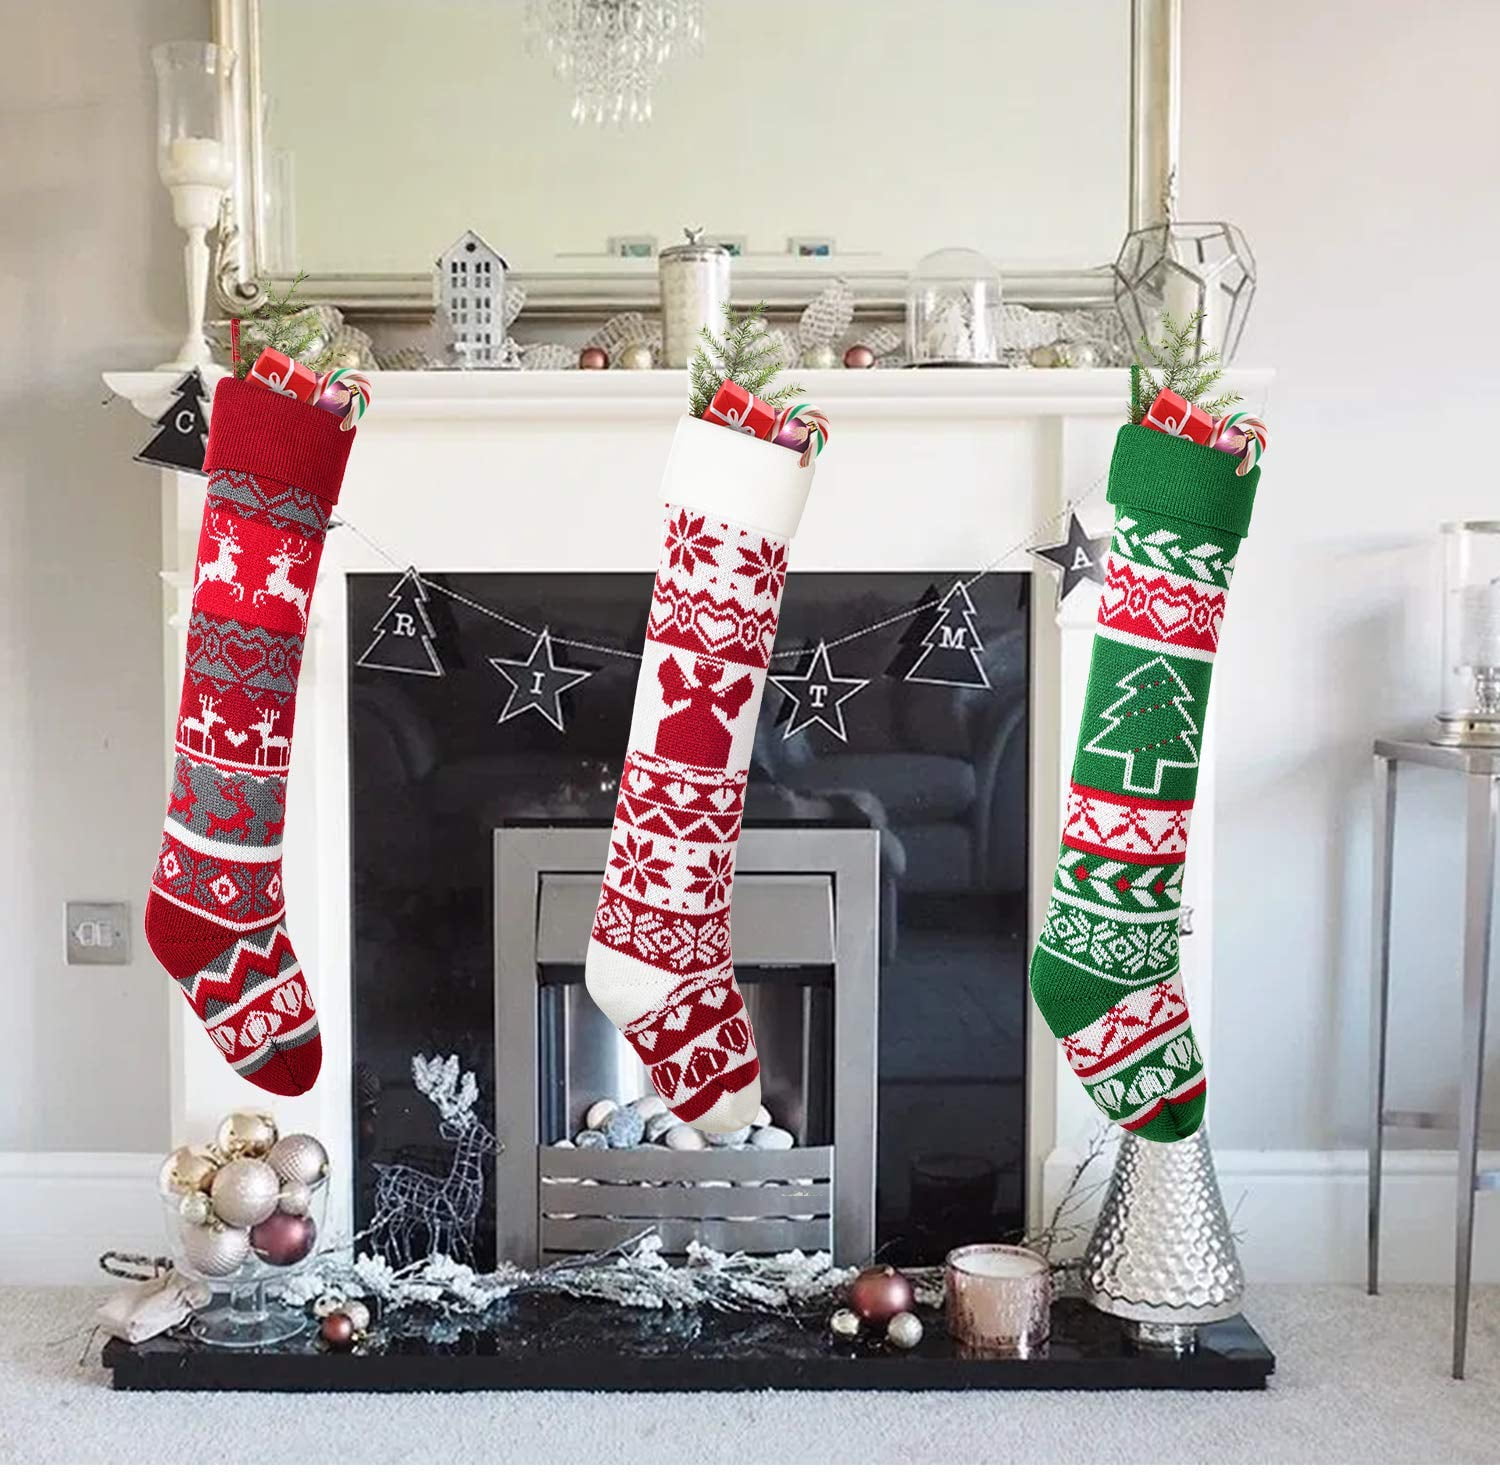 LOMOHOO Pack 4 Christmas Stockings 18 Large Christmas Knitted Stockings Xmas Rustic Christmas Decorations for Fireplace Xmas Party Holiday Burgundy,Gray,Green,Ivory- 4 Pack